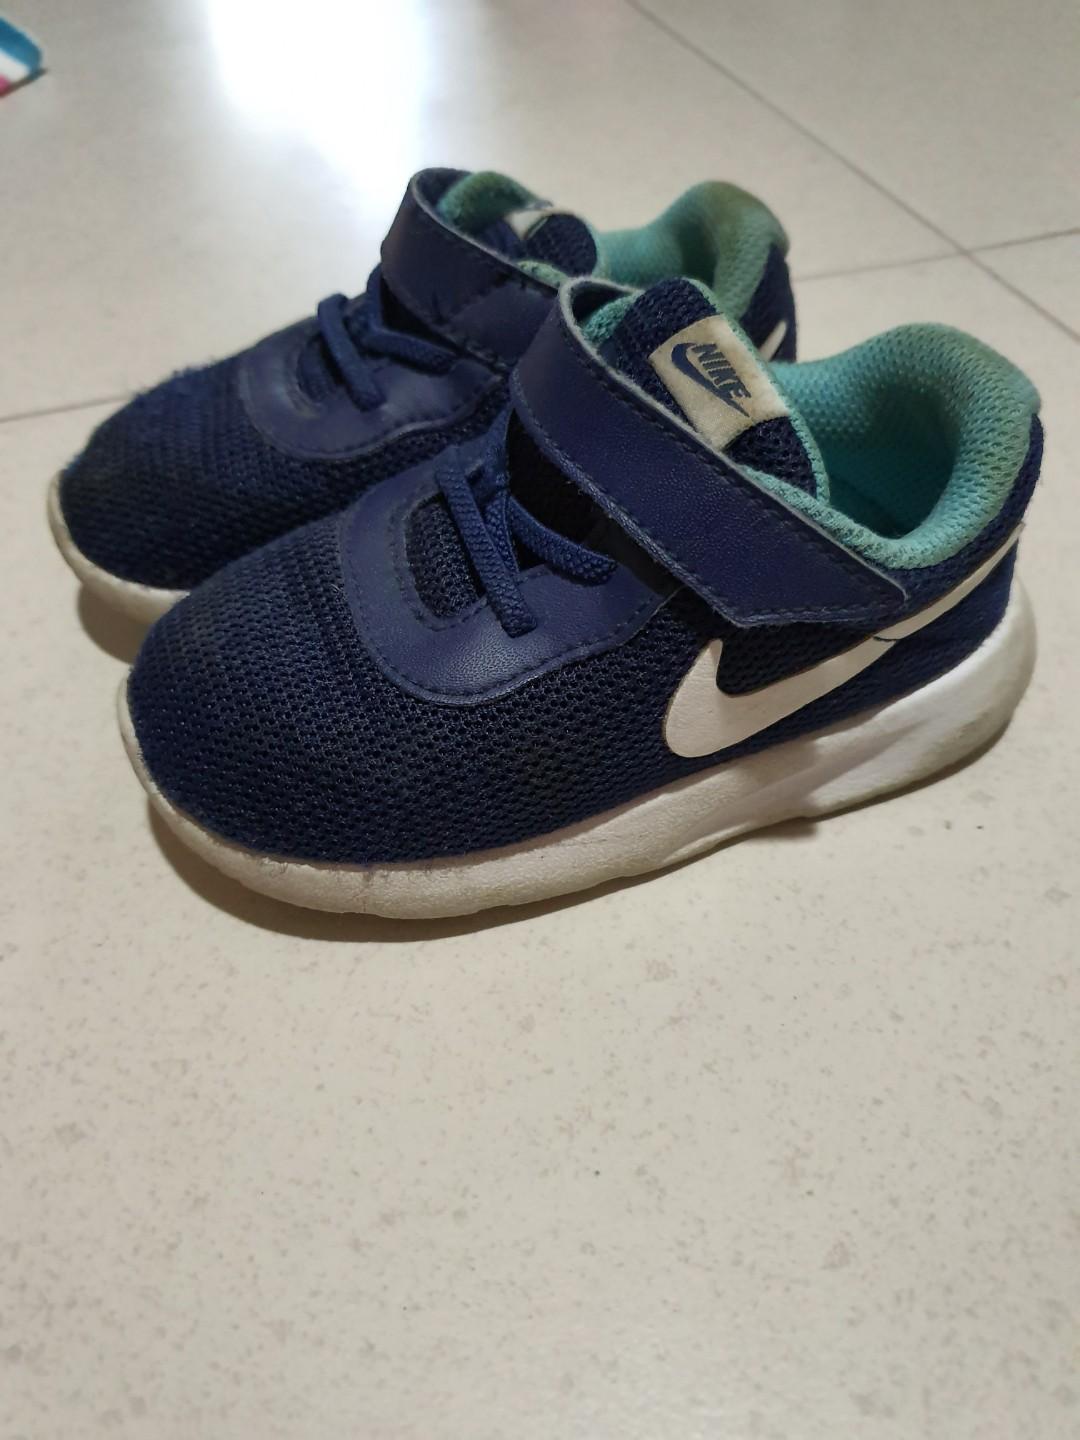 Nike Toddler Shoes Size US7C(Ref to 